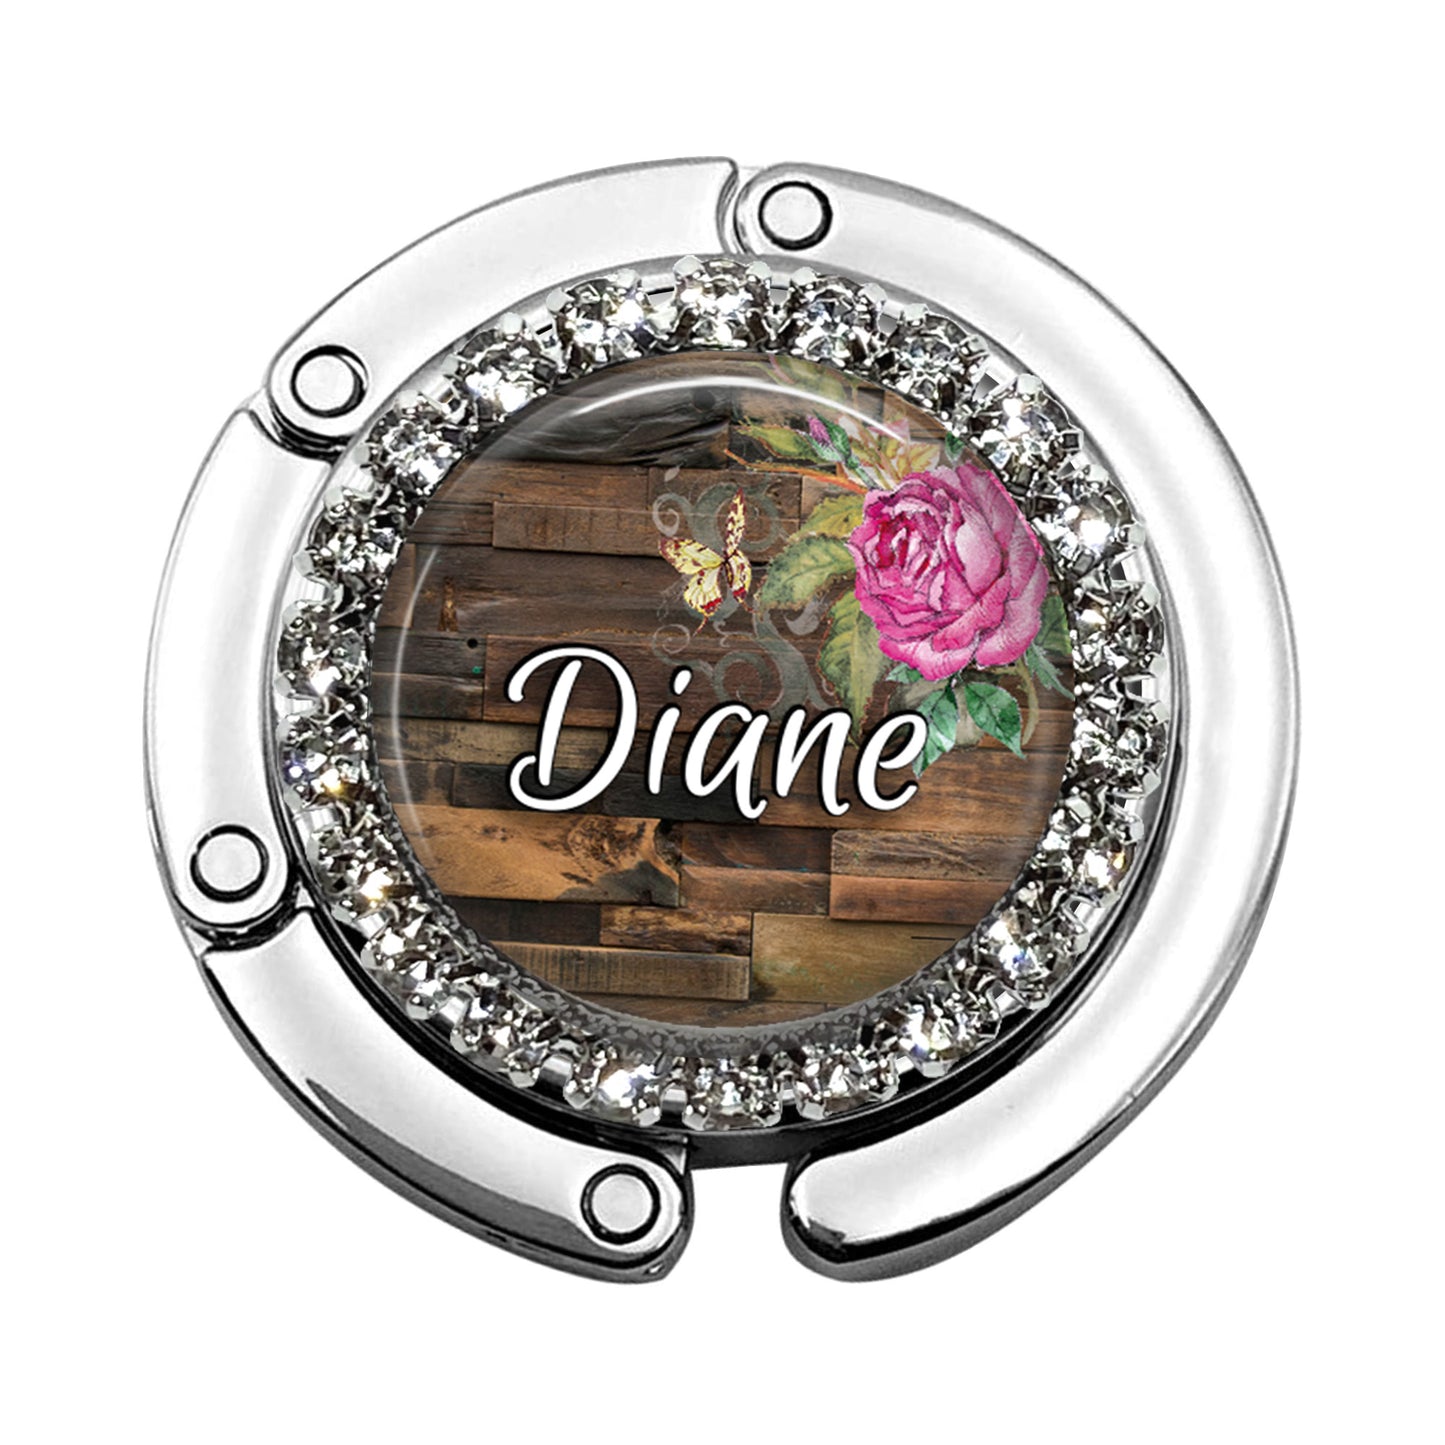 a wooden and crystal plate with a rose on it